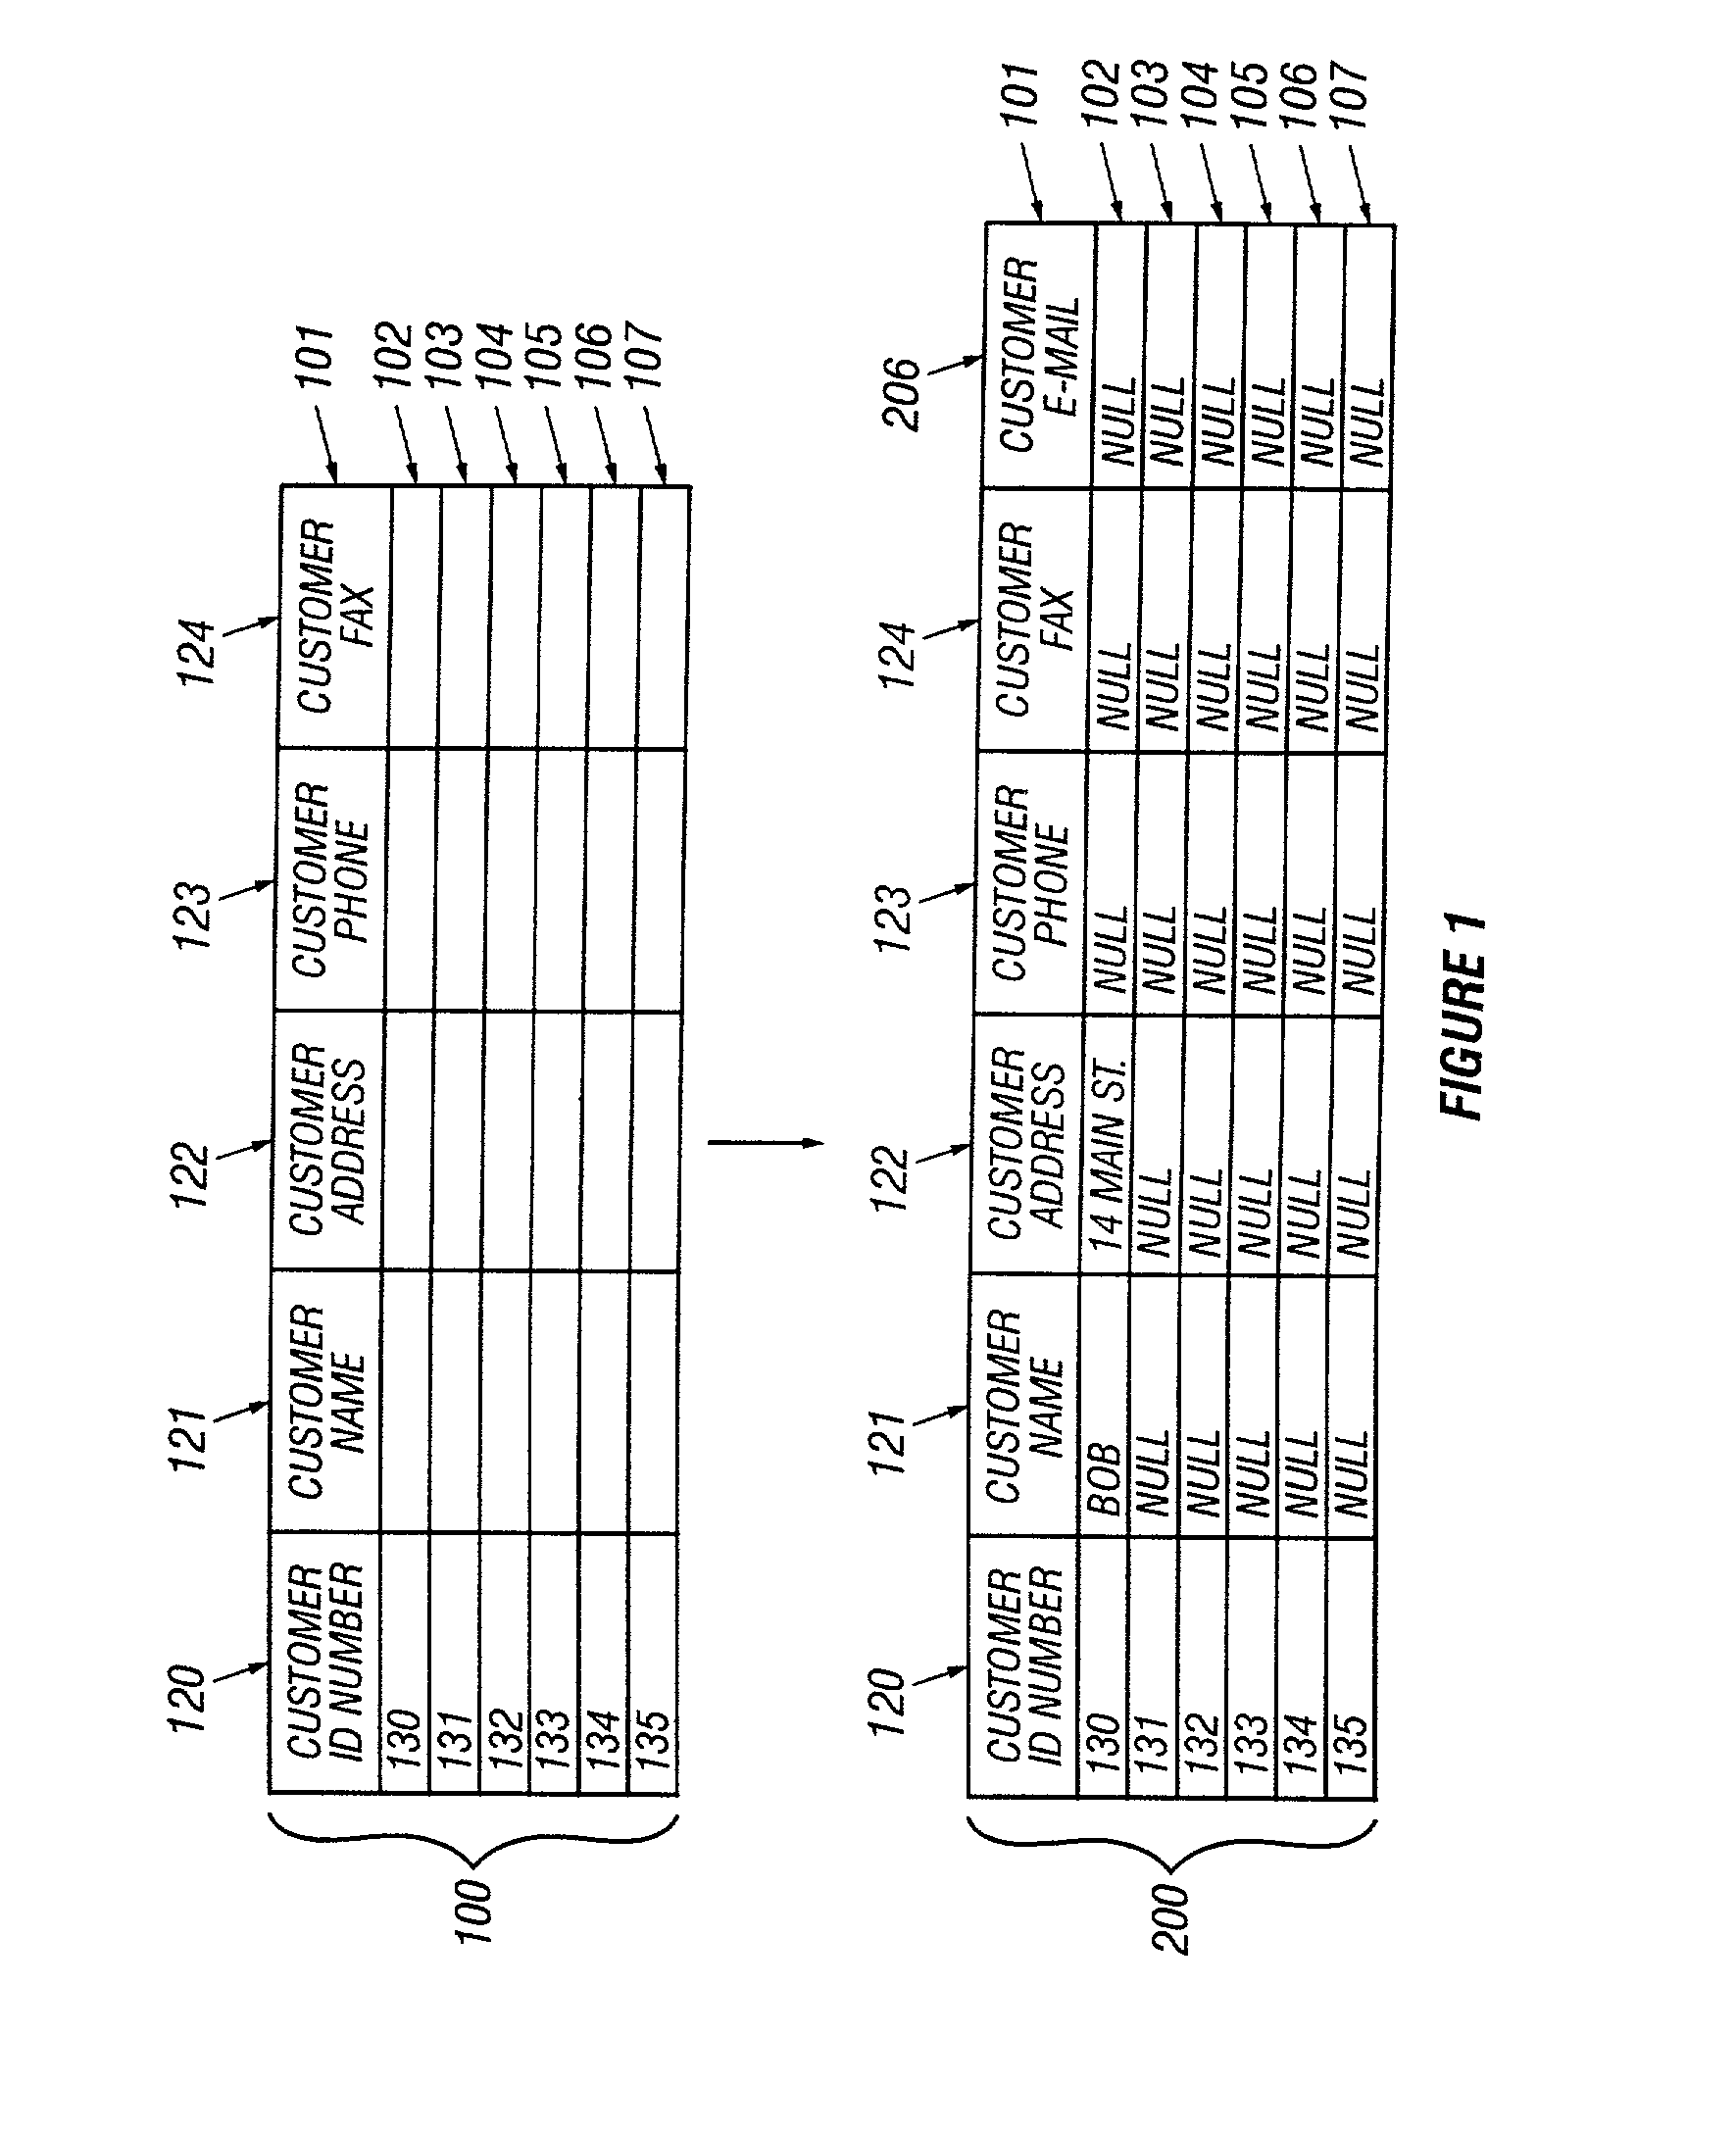 Method and apparatus for event modeling